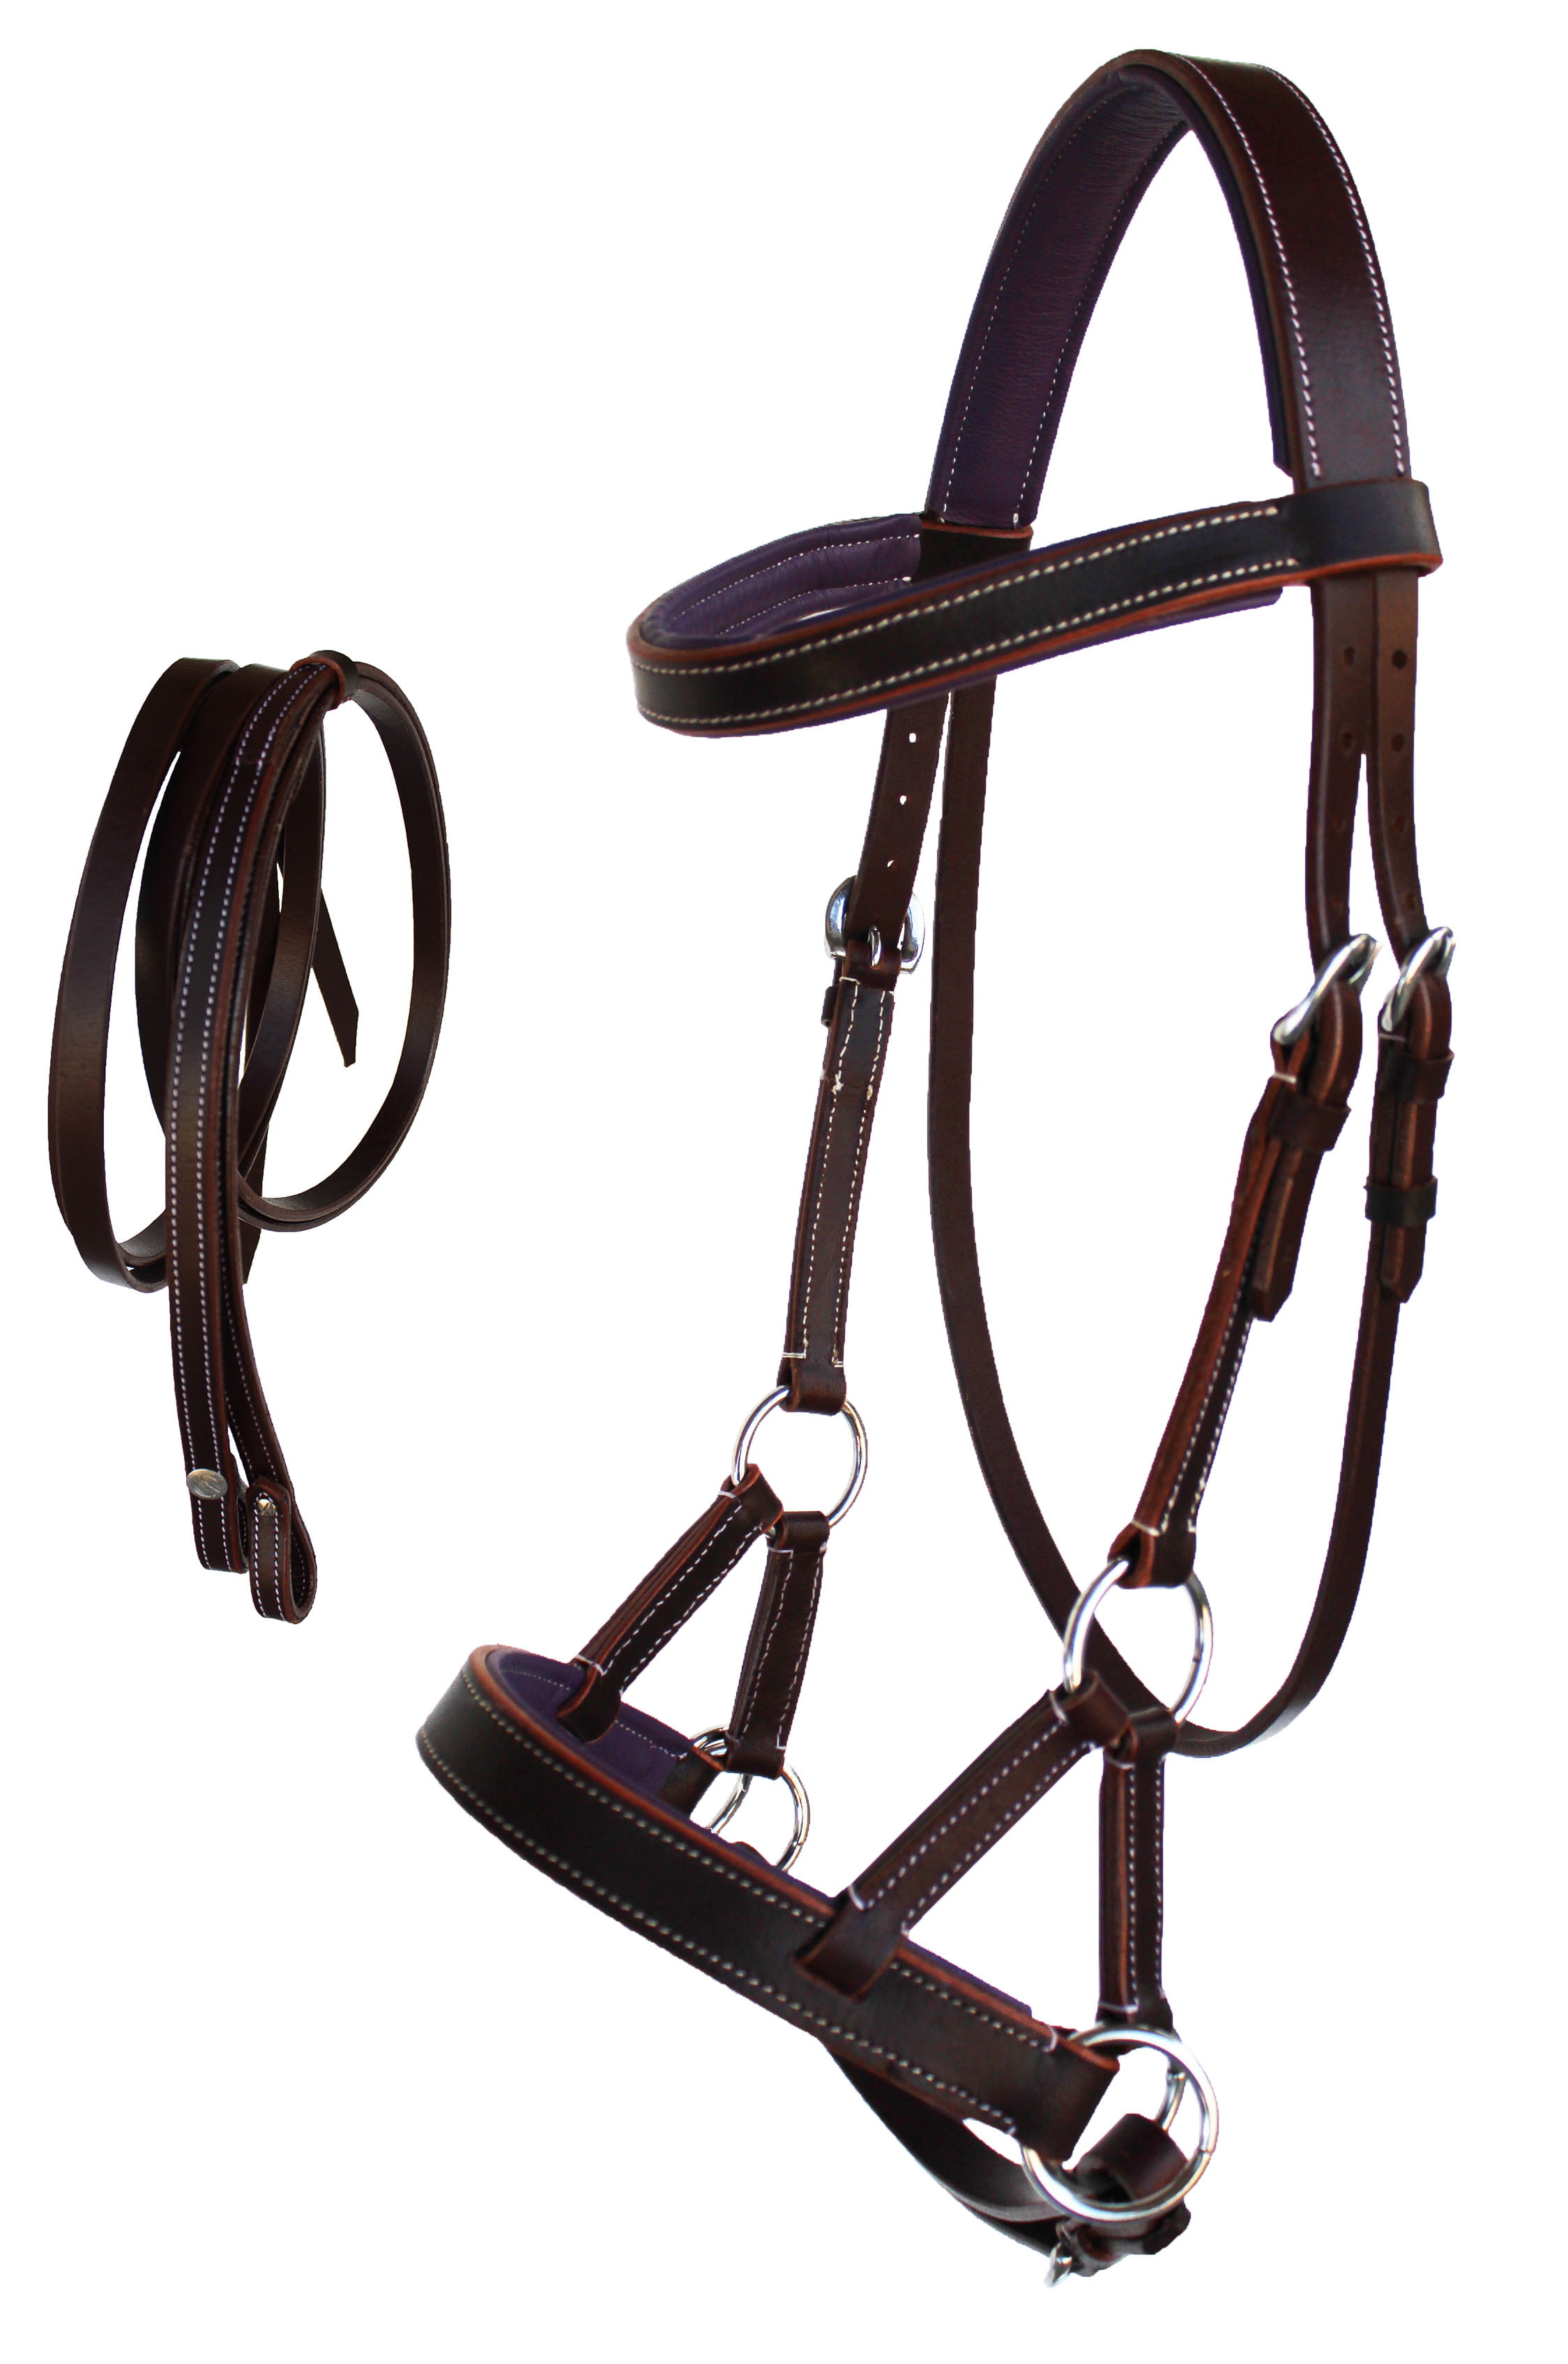 Official Libby's Wide Reins 